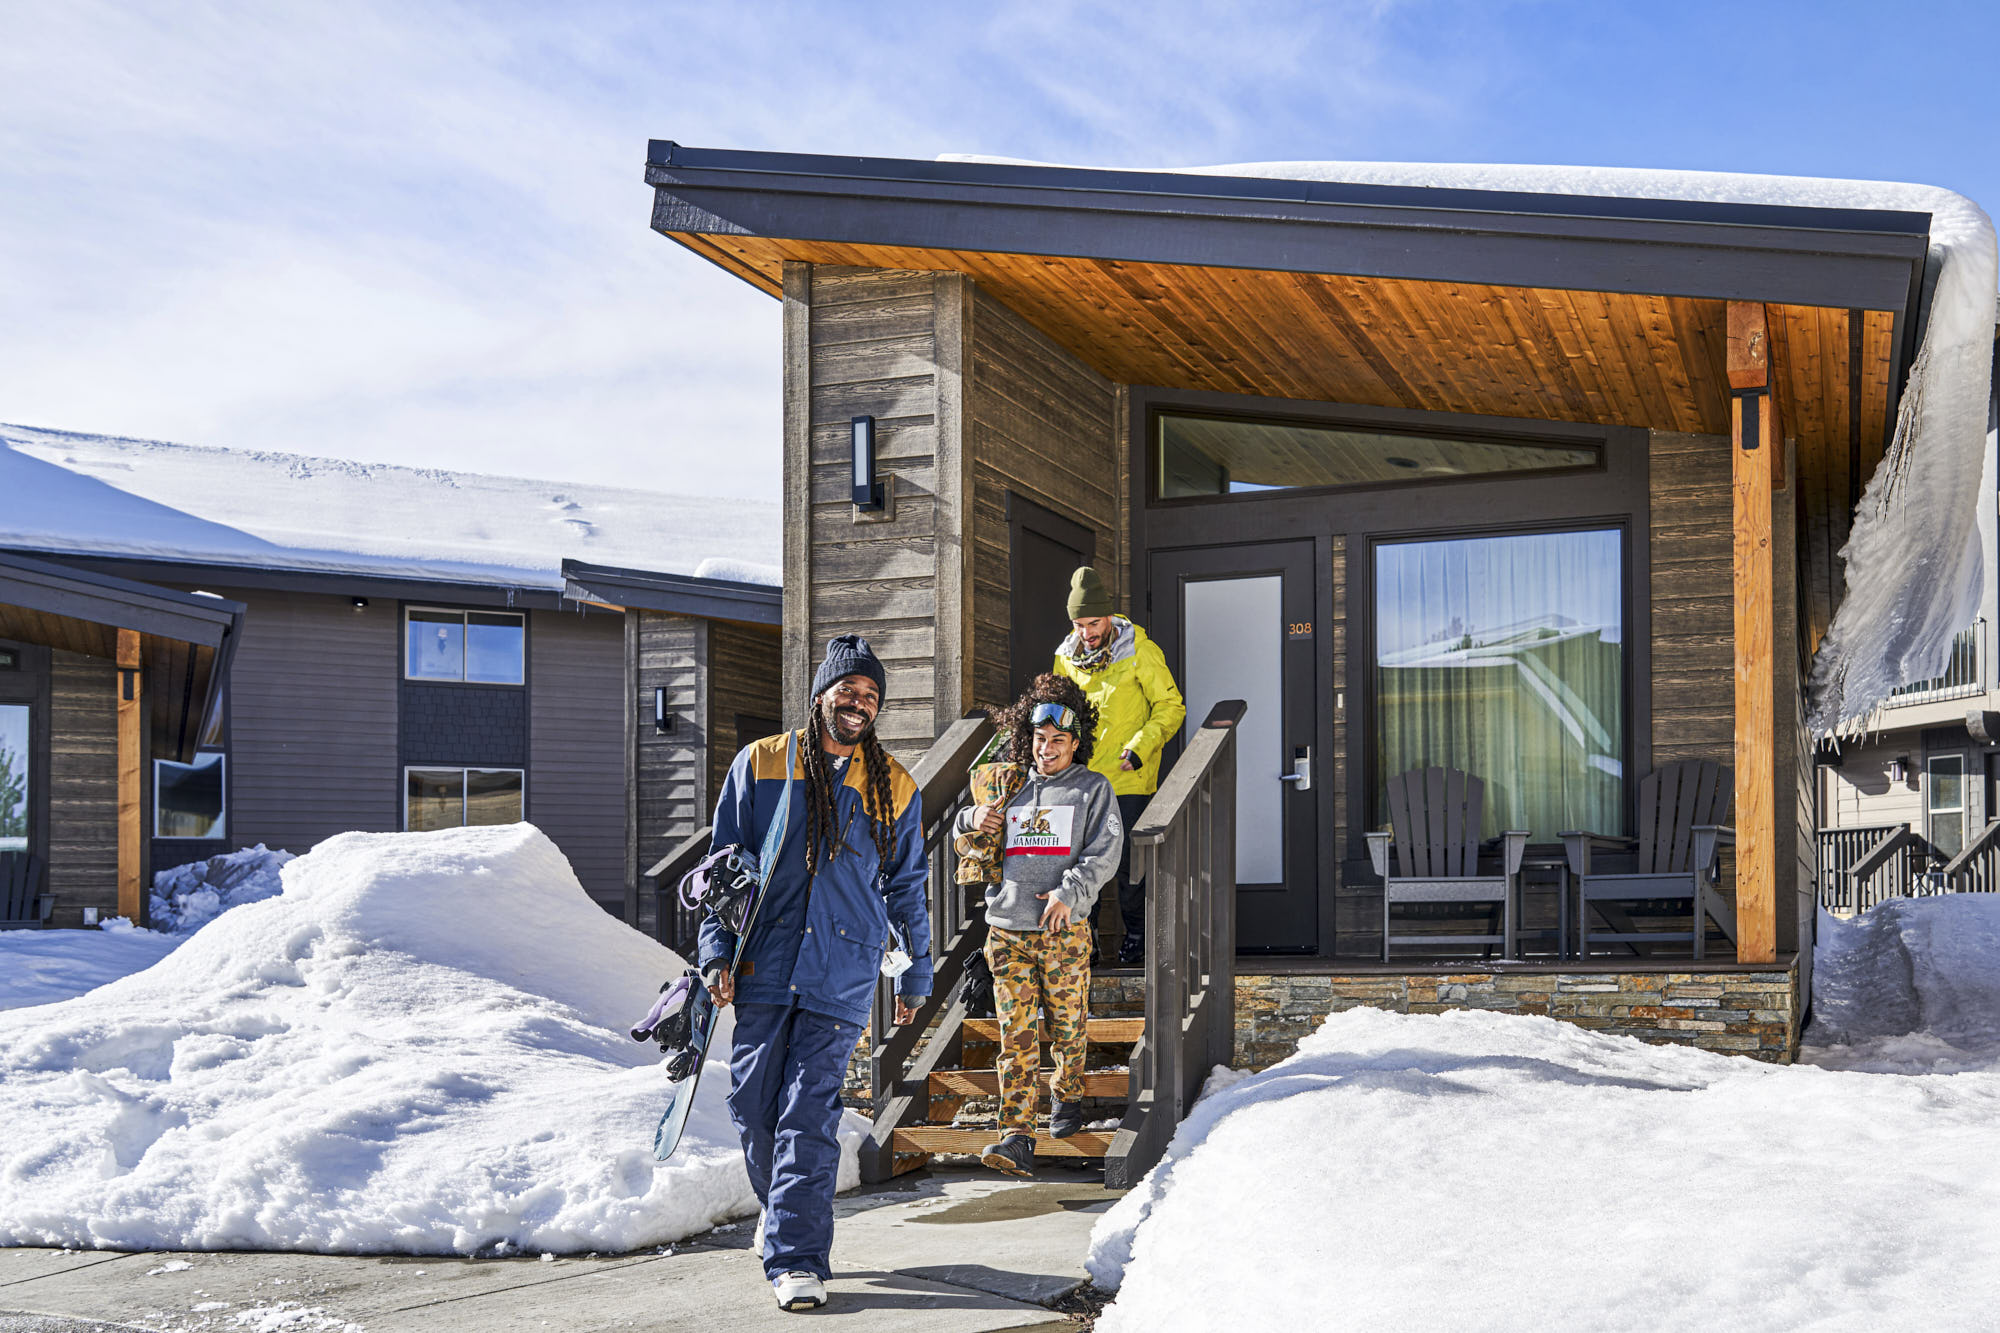 Snowboarders leaving cozy cabin, getting ready for a day on the slopes